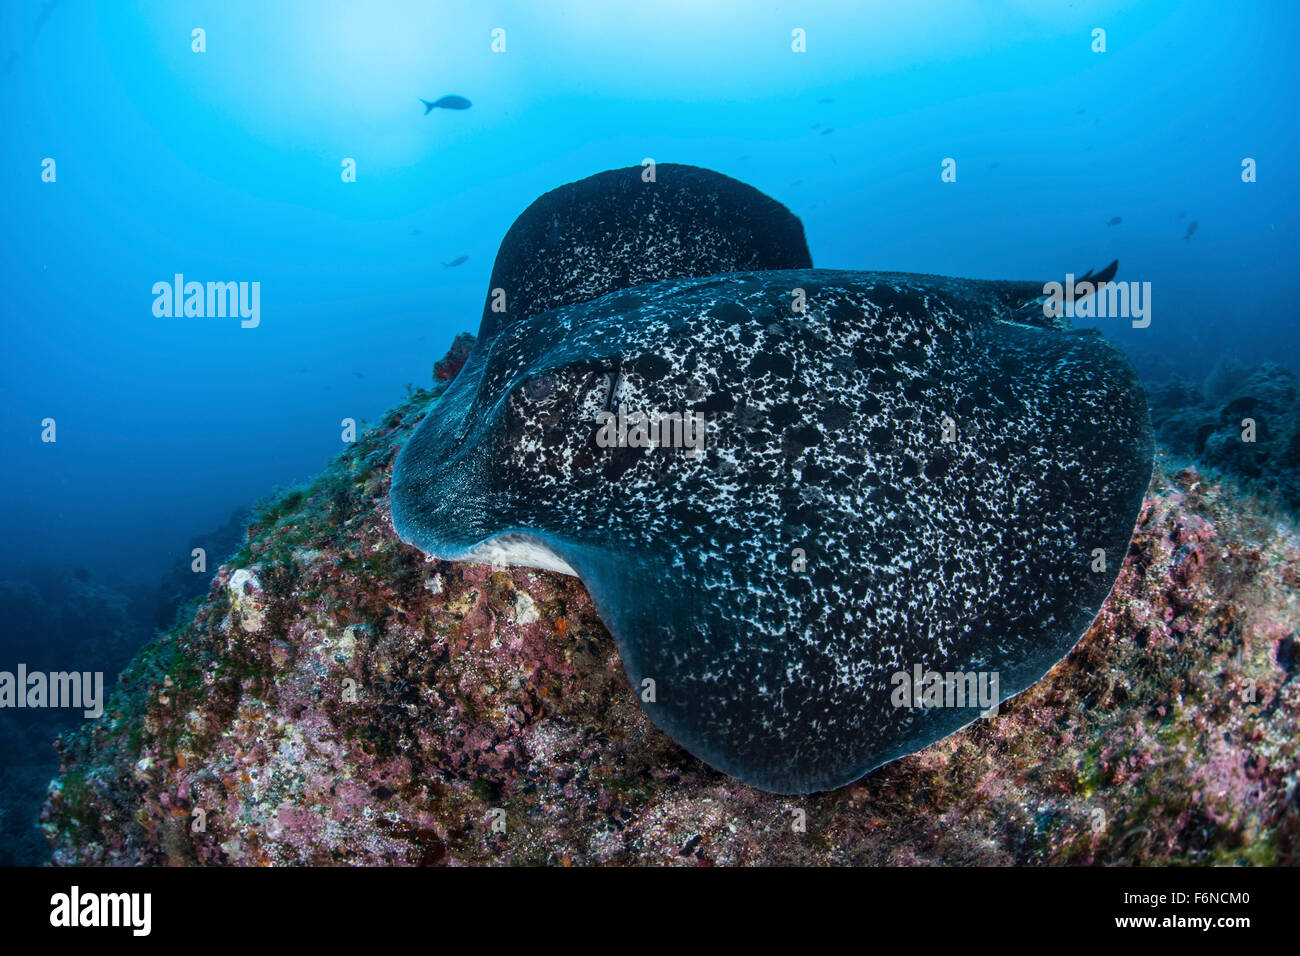 A large black-blotched stingray (Taeniurops meyeni) swims over the rocky seafloor near Cocos Island, Costa Rica. This remote, Pa Stock Photo